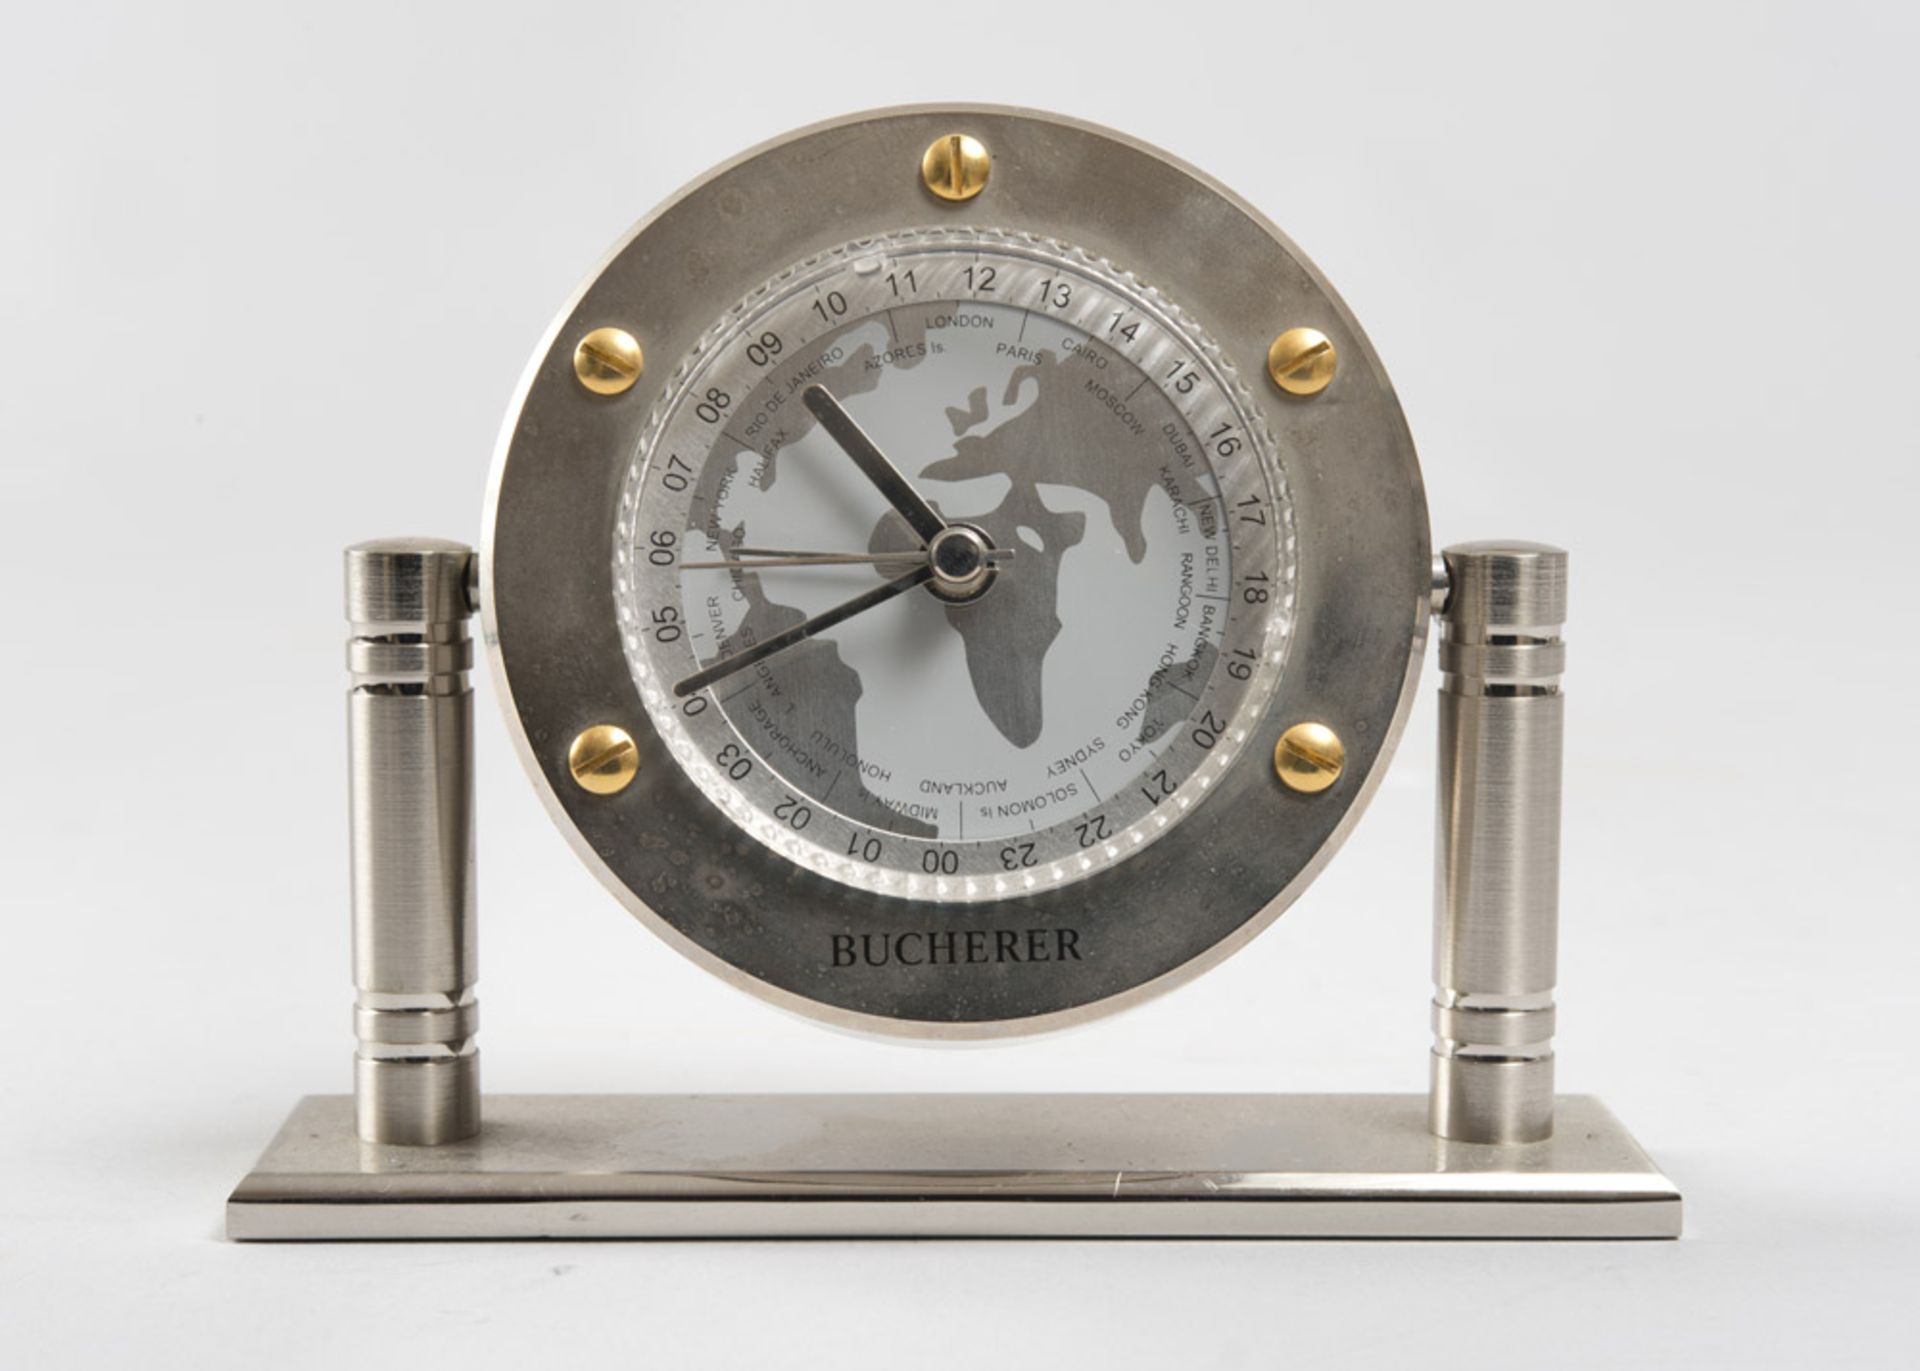 TABLE CLOCK, BRAND BUCHERER with circular brass case and dial with date and moon phase. Measures cm.